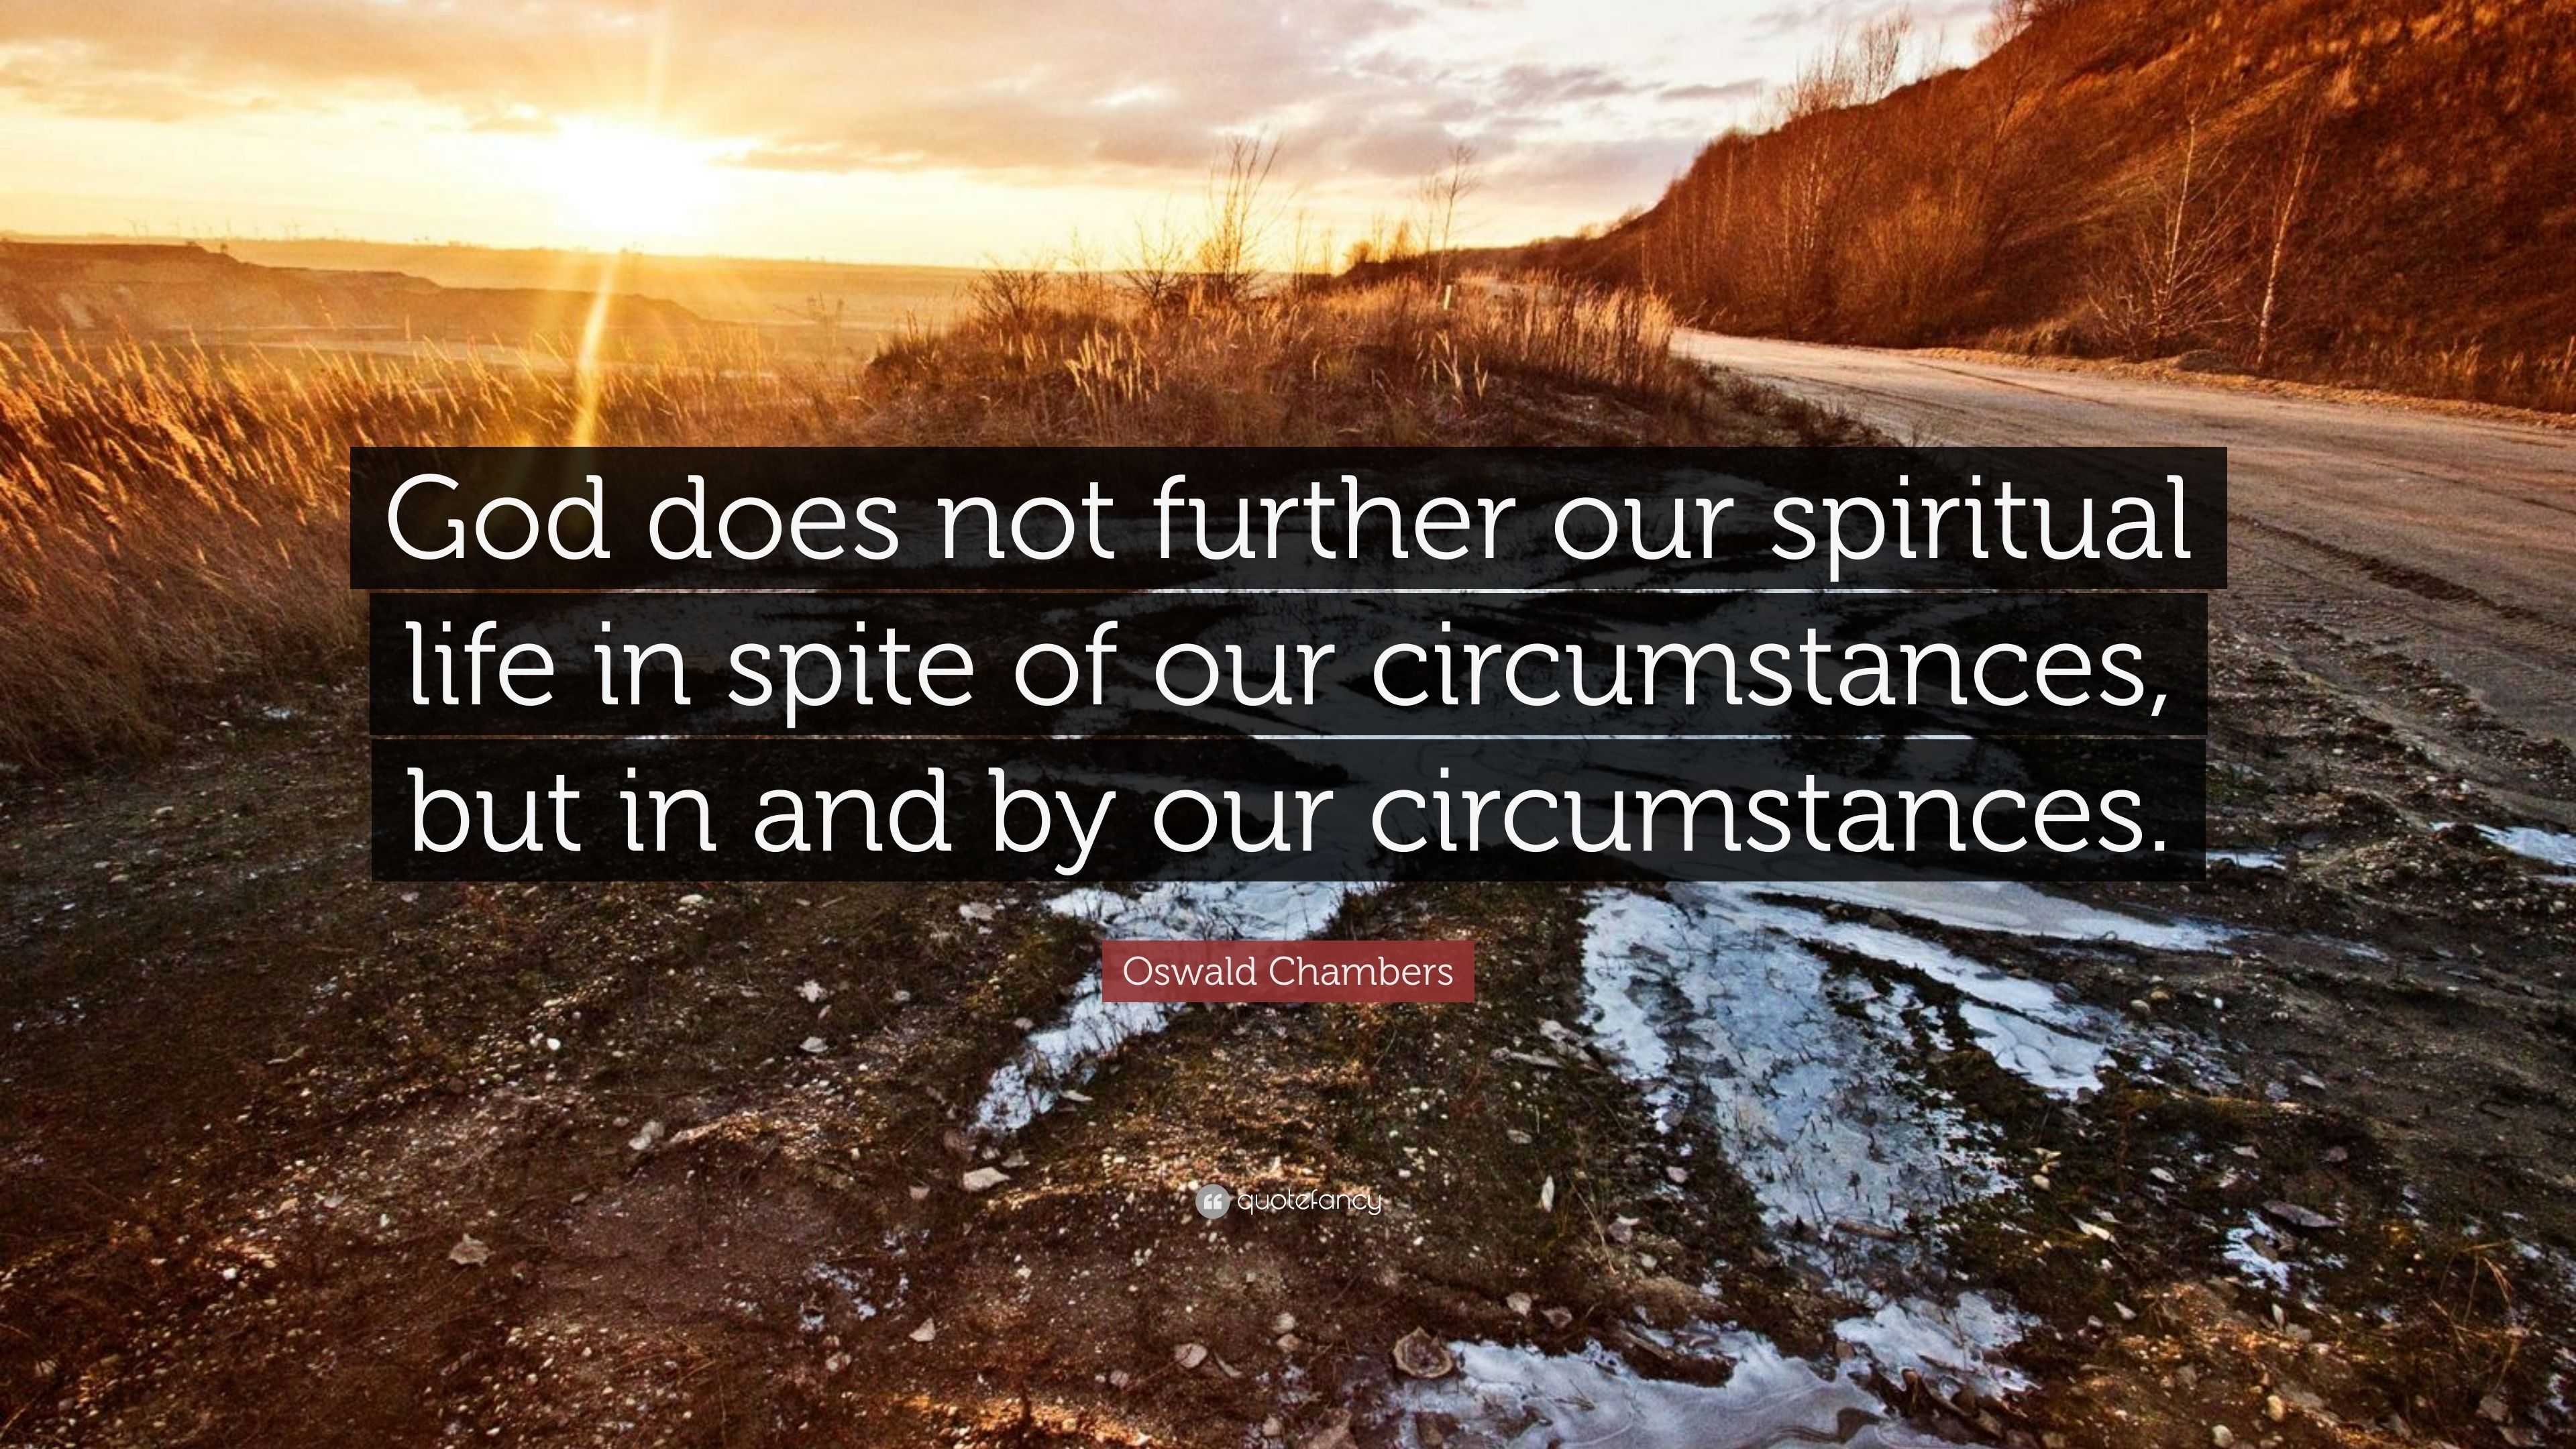 Oswald Chambers Quote: “God does not further our spiritual life in ...